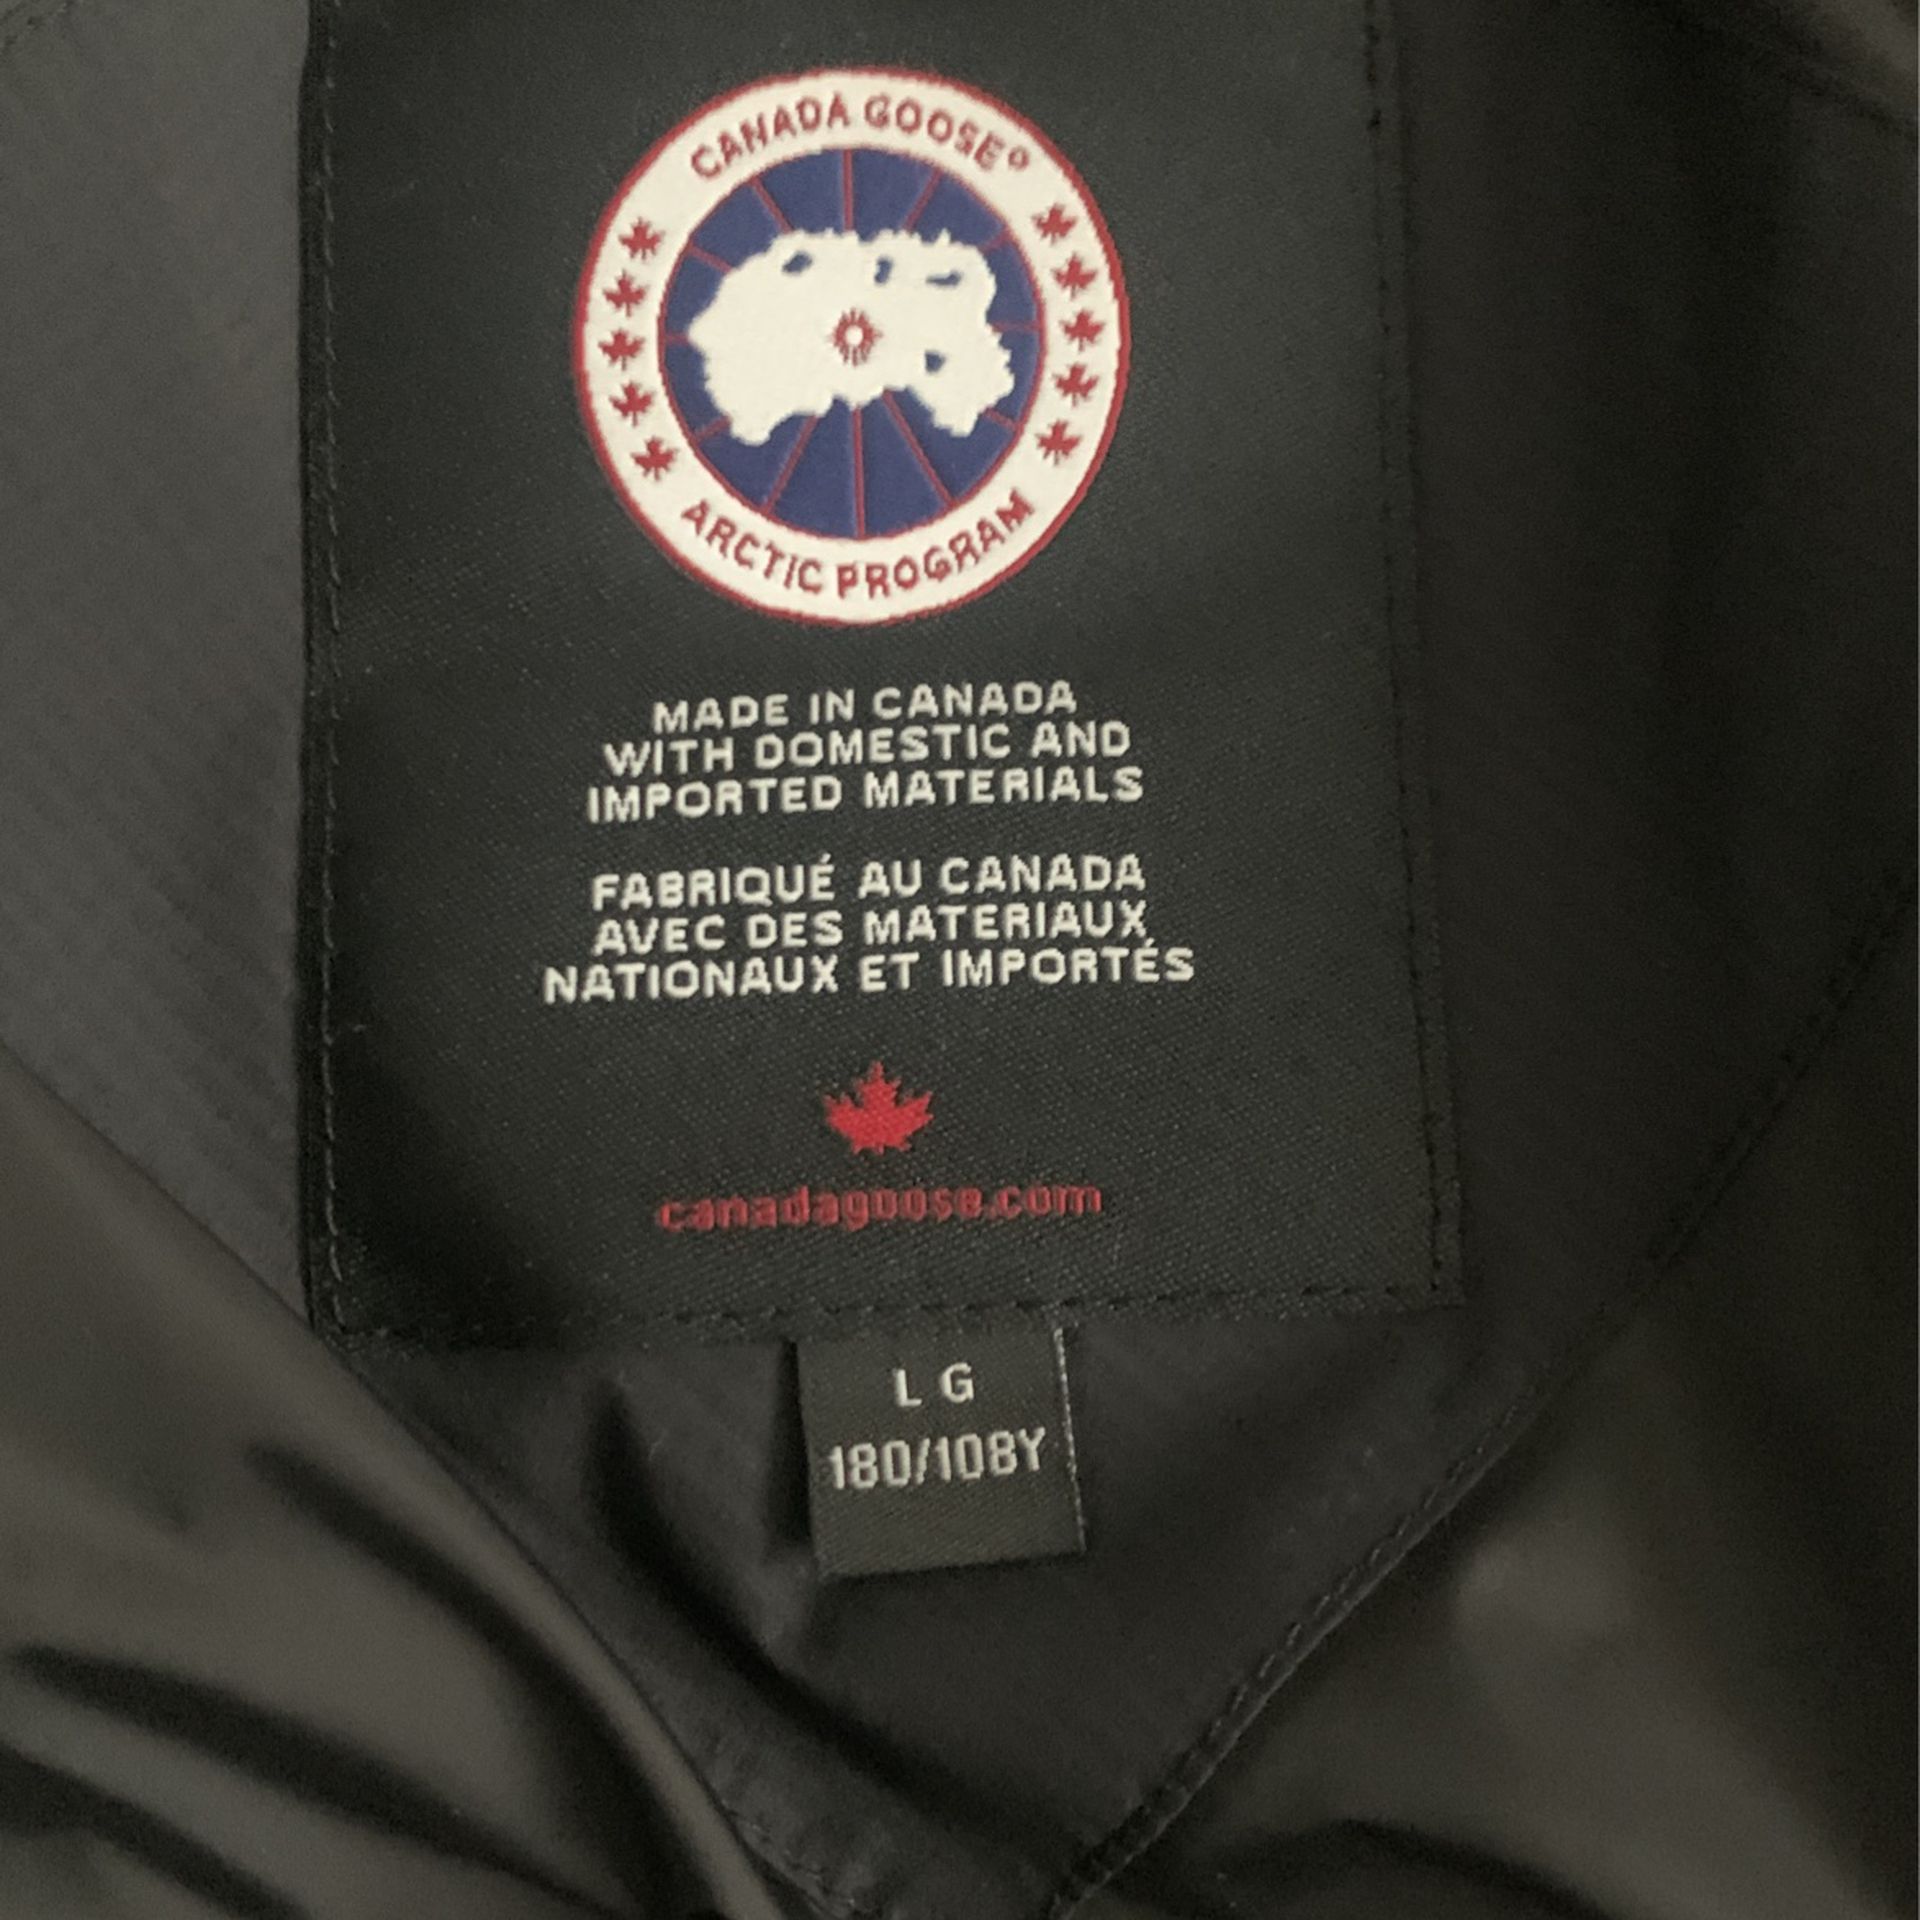 Blac/Red Canadian Goose Jacket With 2 Canadian Goose Beanies one White one Black/Red